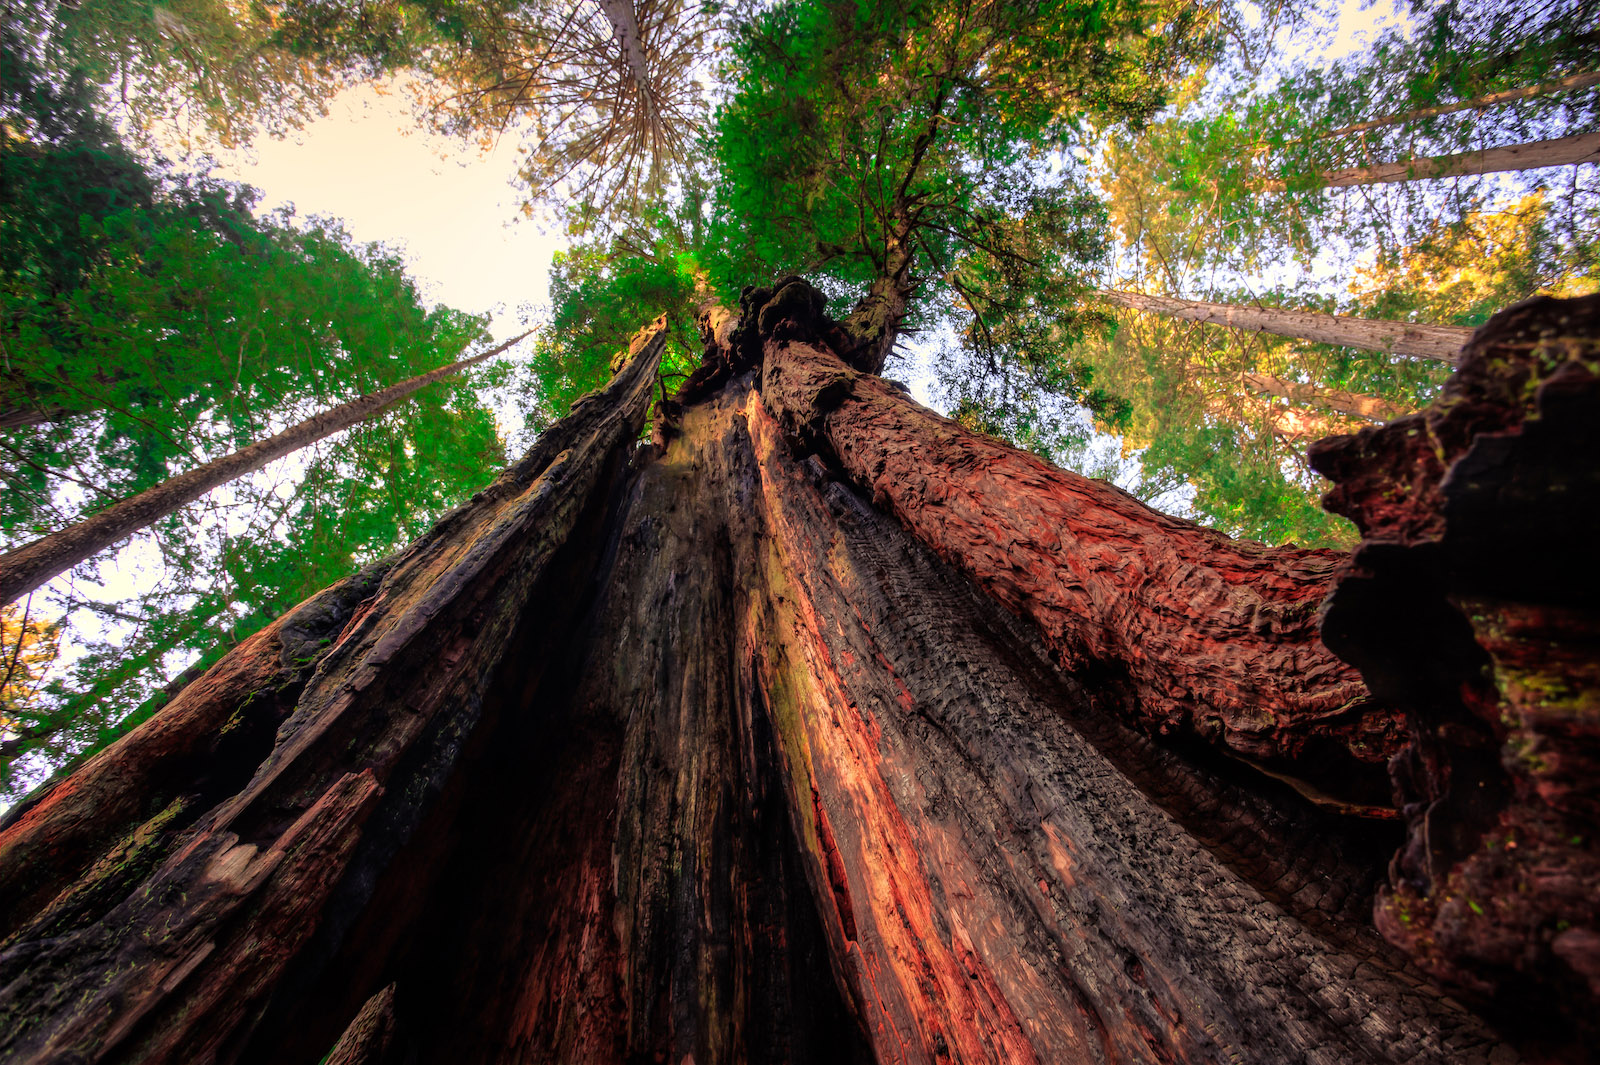 13 Facts You Might Not Know About the Redwoods